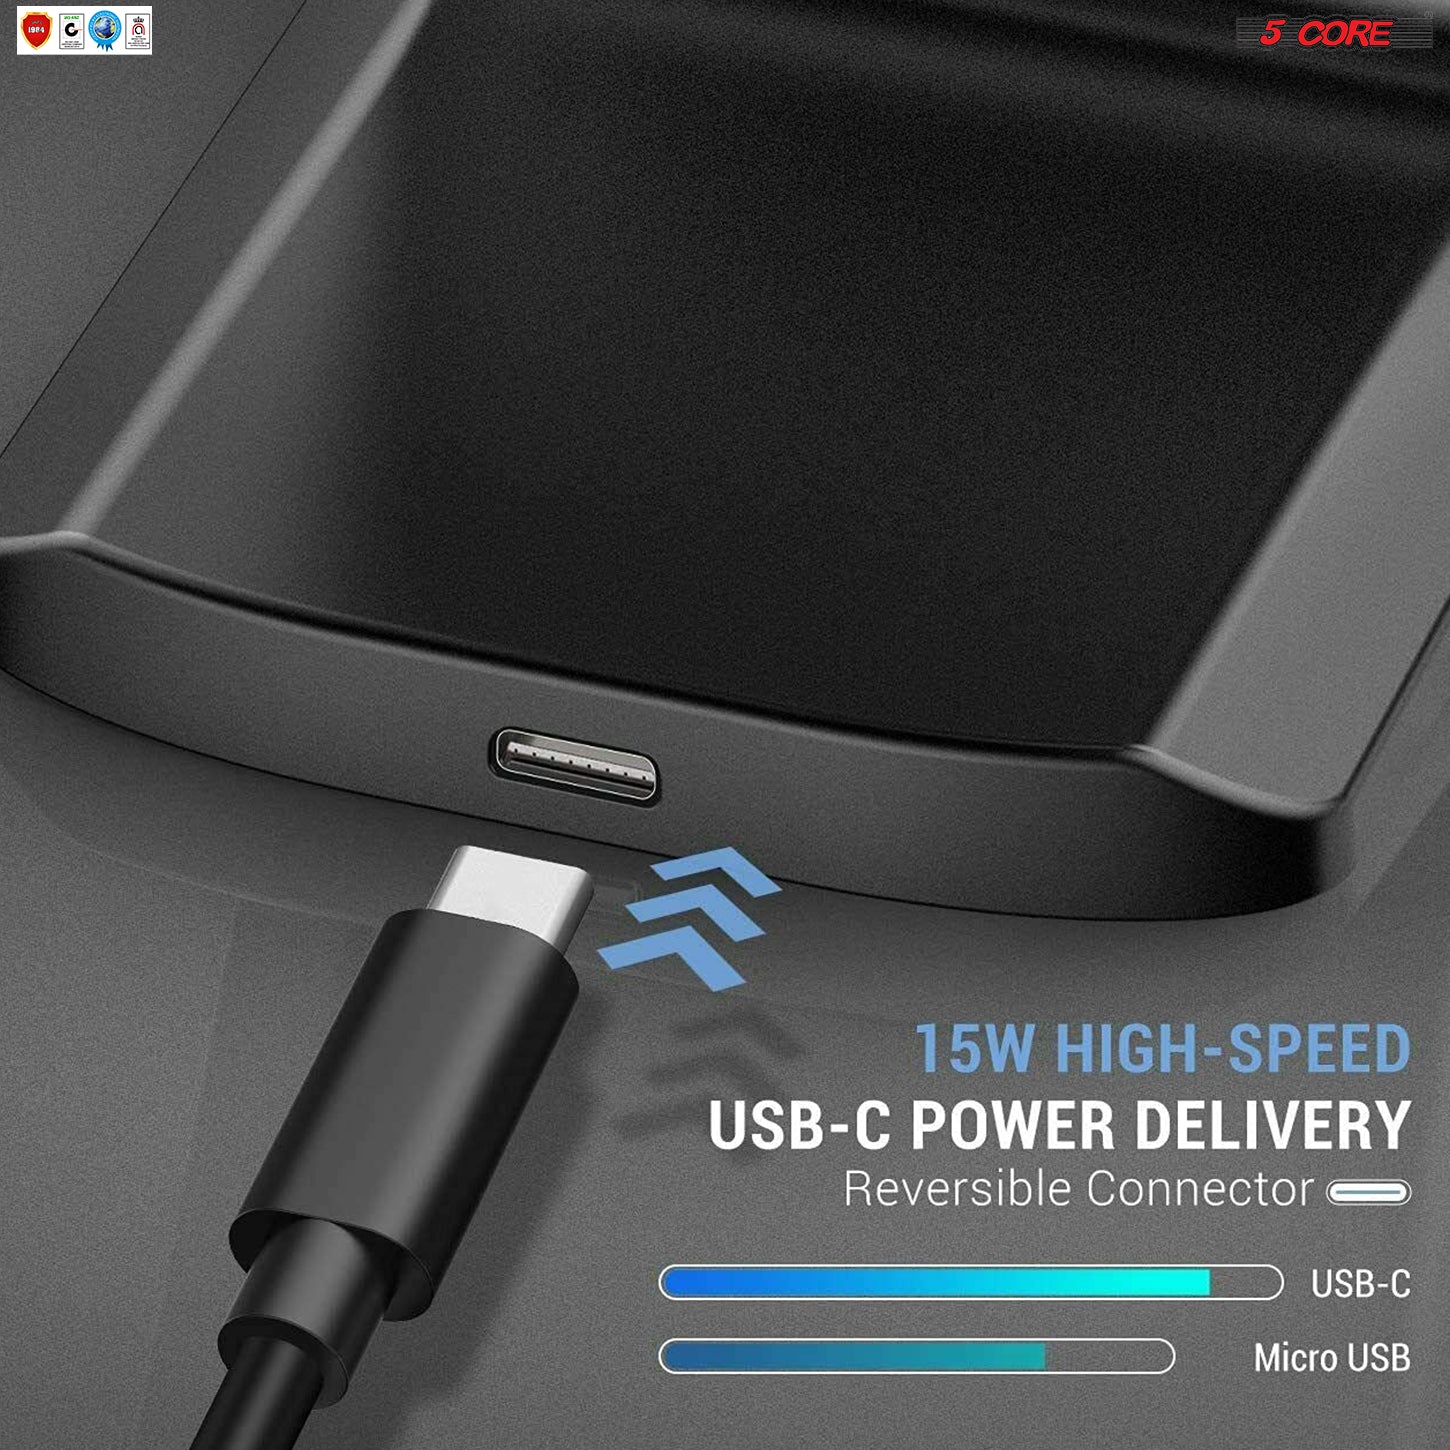 Fast wireless charger with 10W max output: ideal for charging smartphones, tablets, and other Qi-enabled devices.